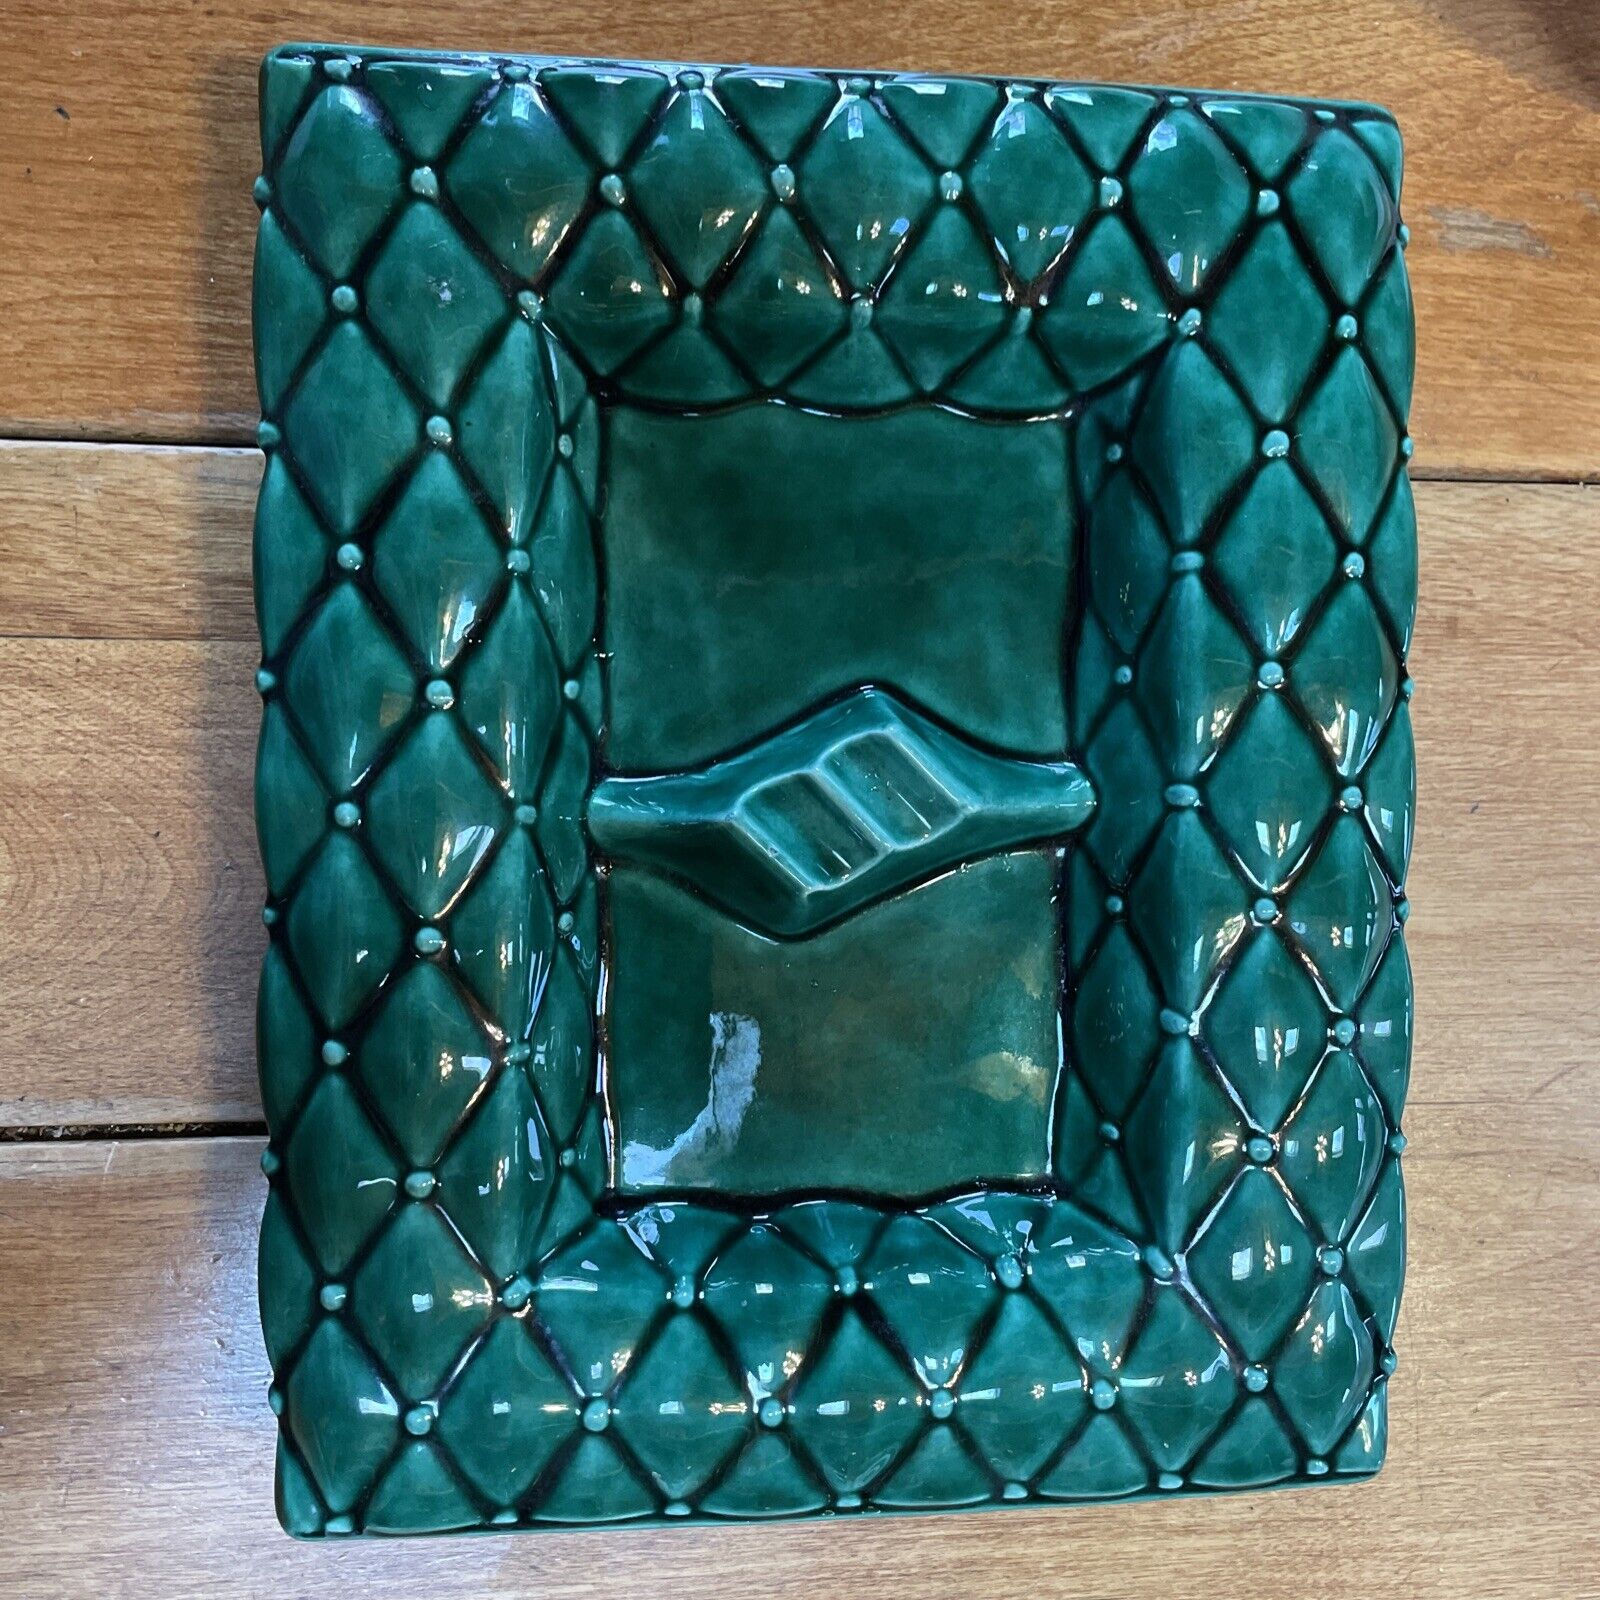 Vintage 1963 Turquoise Green Buttoned Cushion ashtray Signed On Bottom. 9.5x7.5